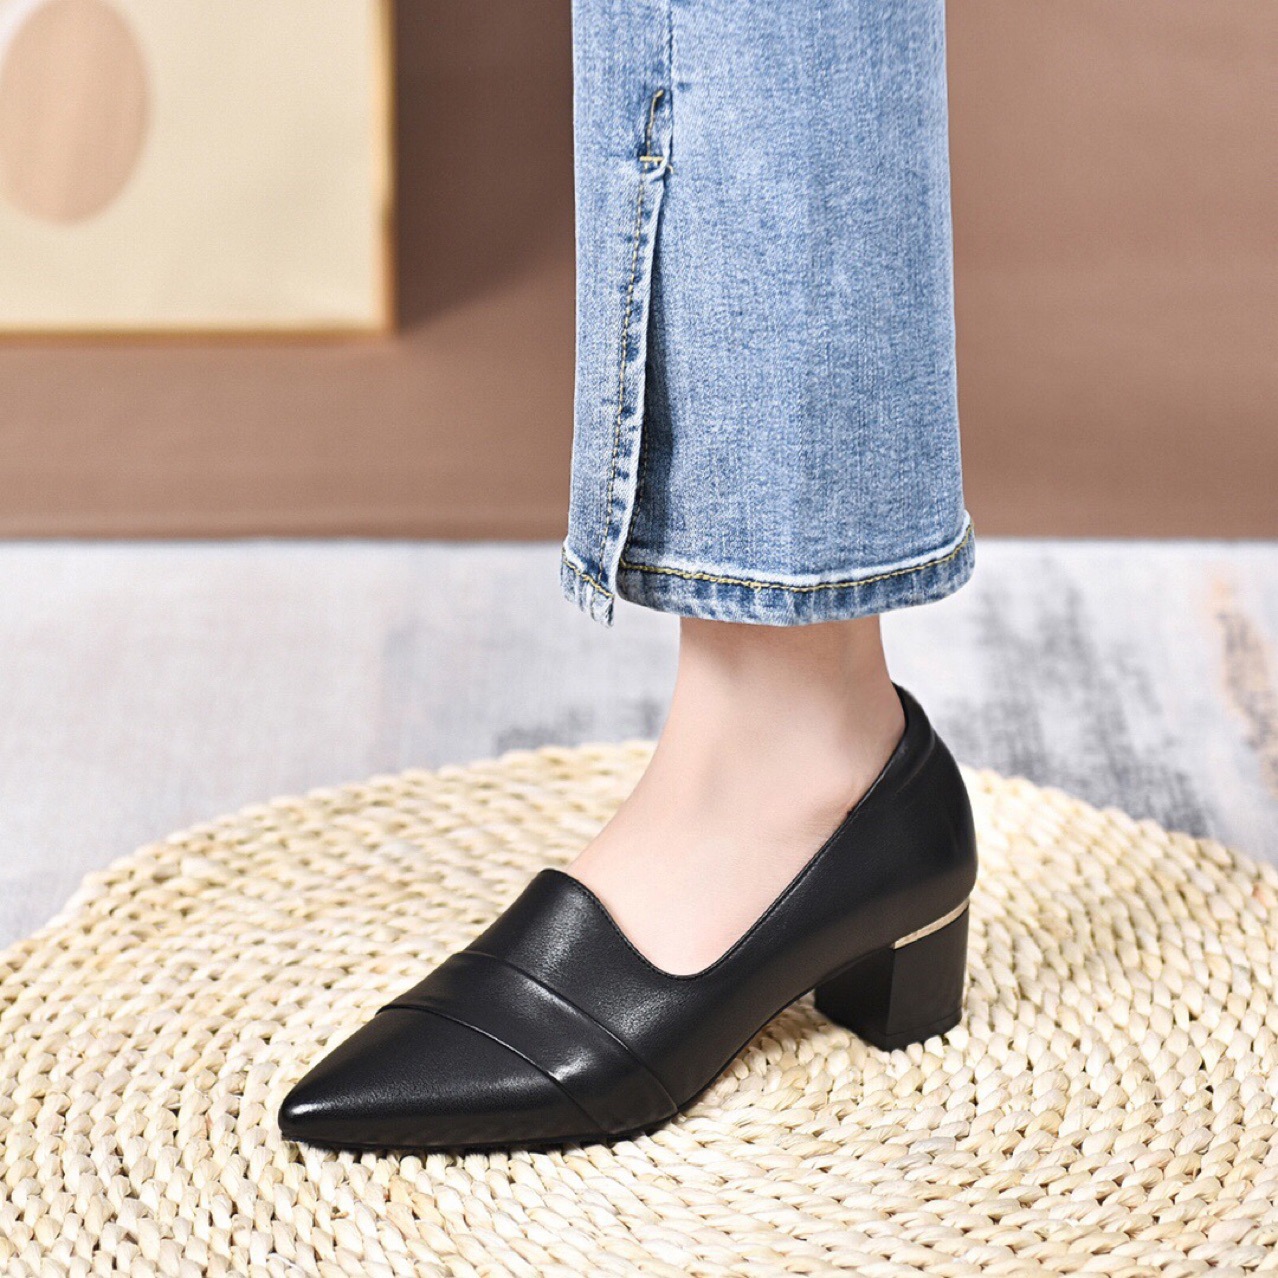 Spring 2022 New Leather Block Heel Single Shoes Women's Pointed Toe Deep Soft Leather Small Leather Shoes Mid Heel British Style Loafers